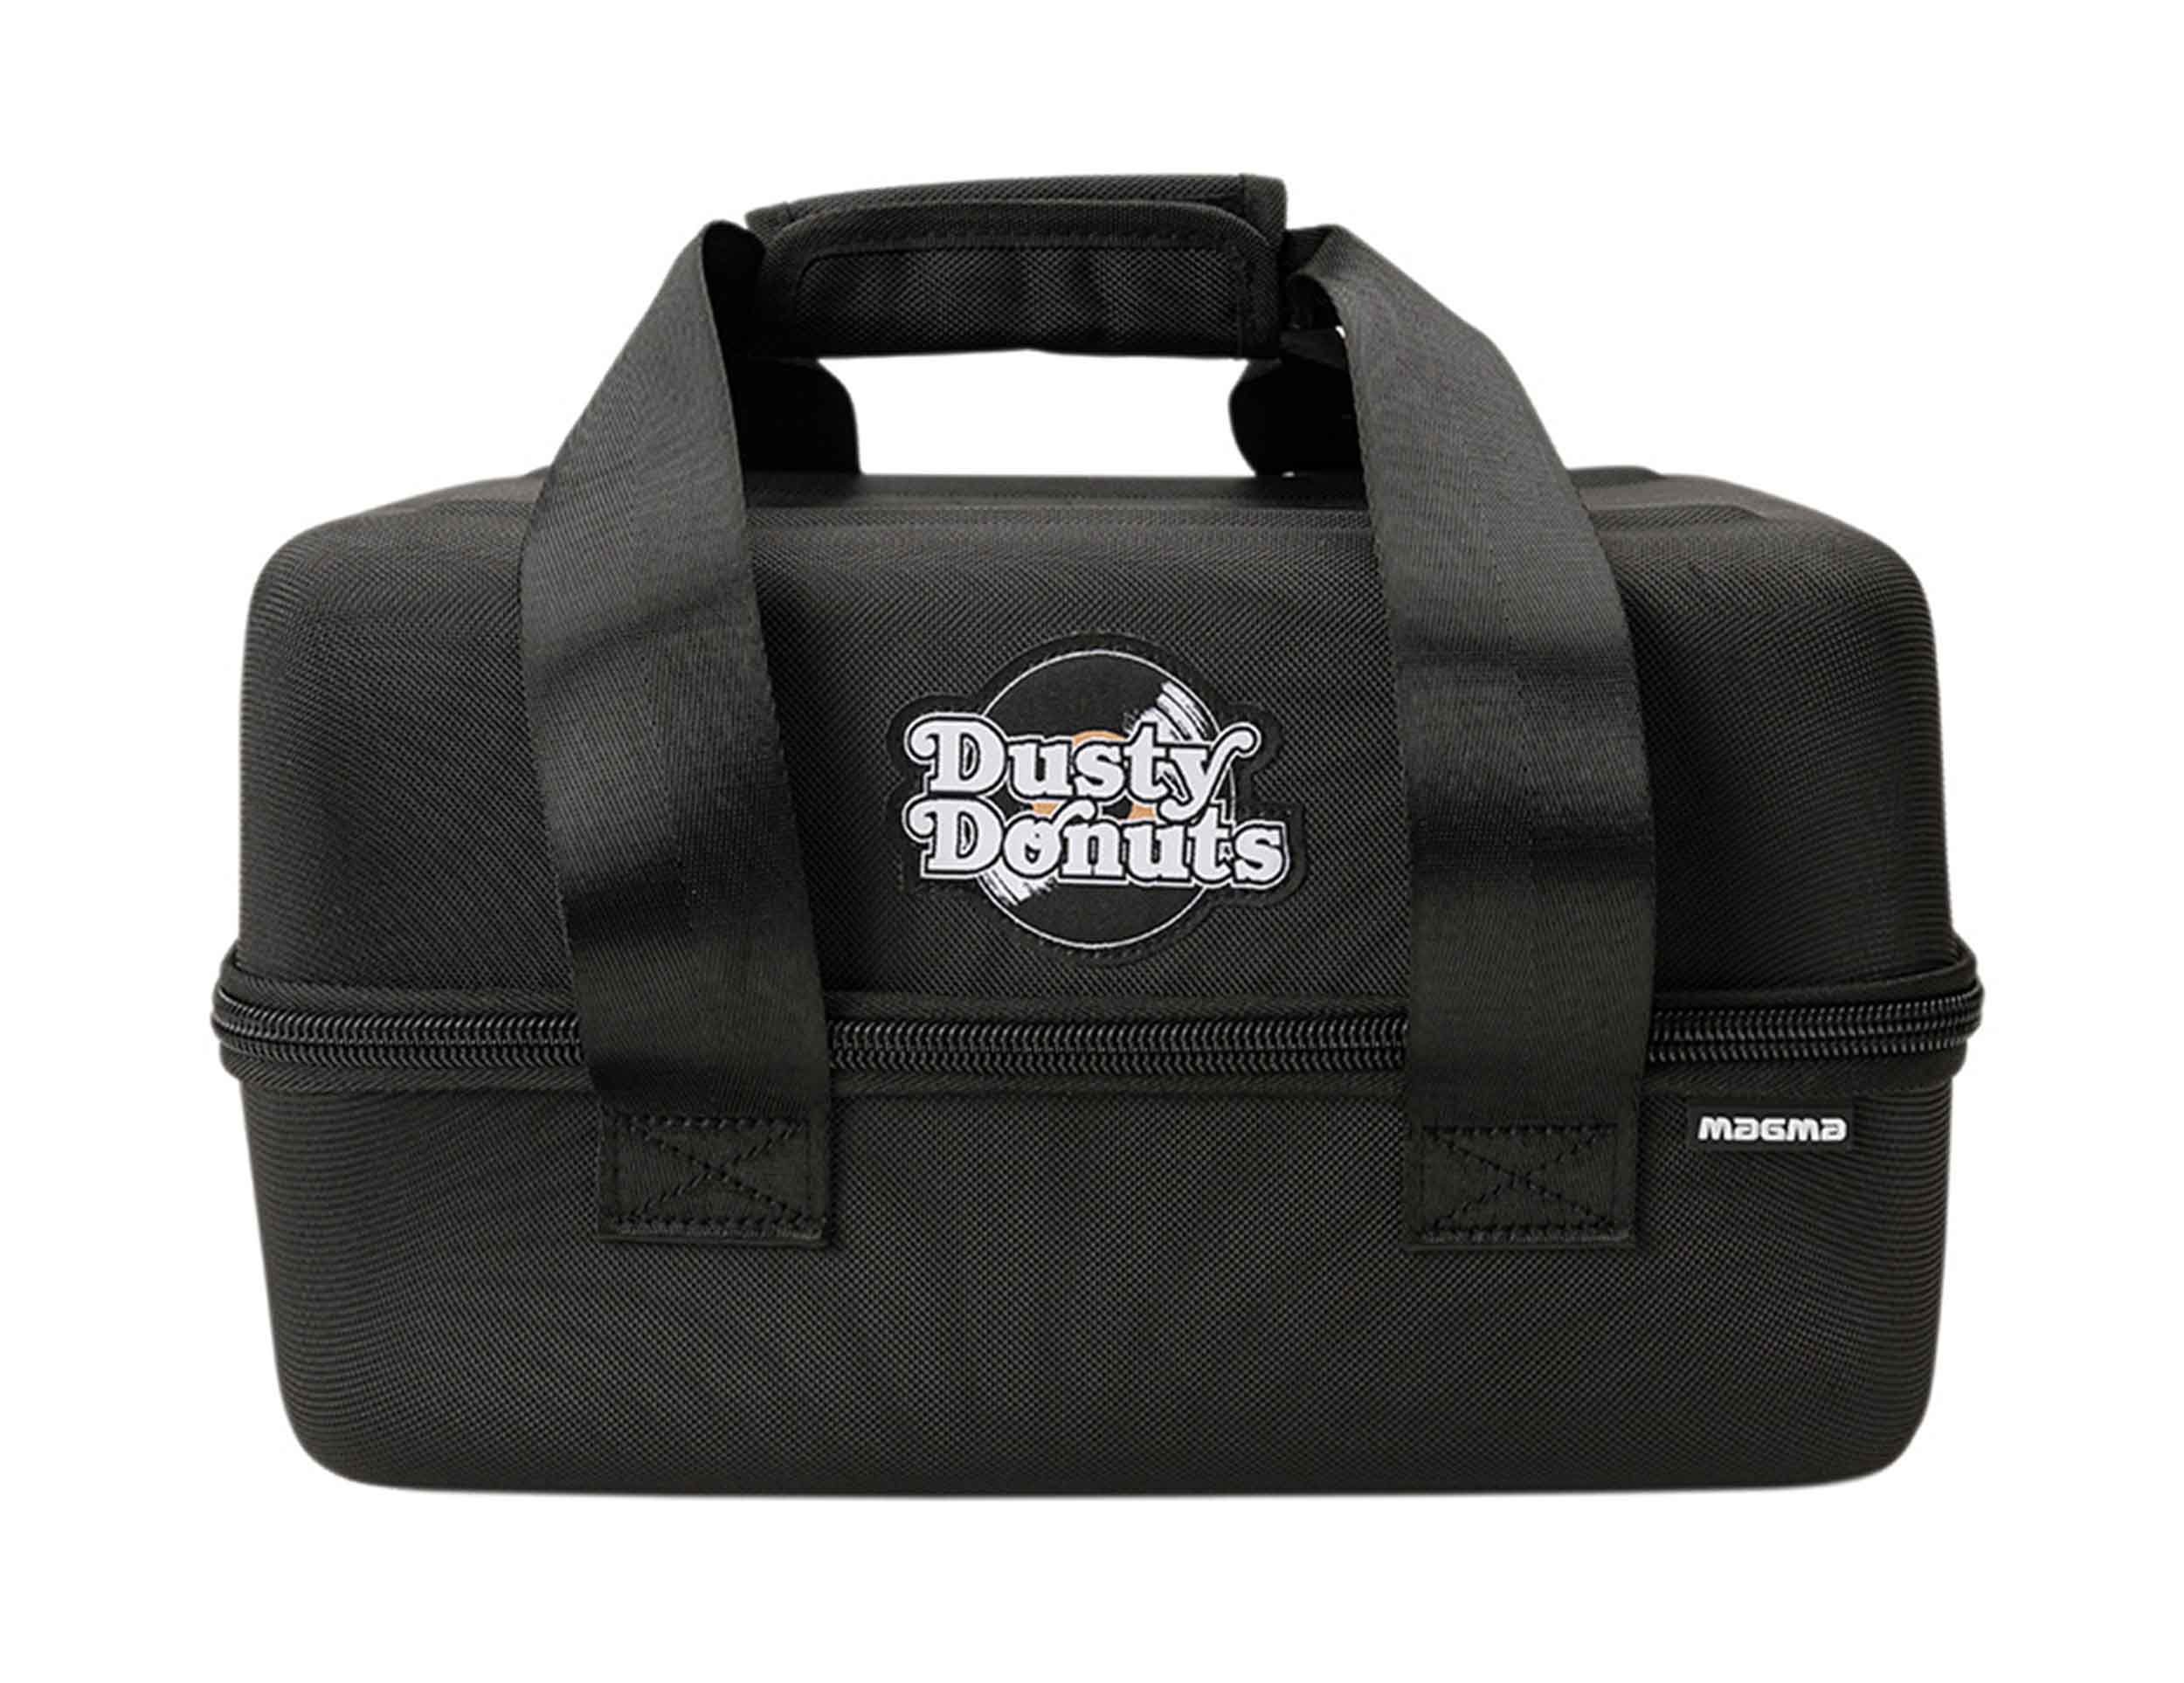 Magma MGA43022, Record Bag for 45 Sandwich Dusty Donuts by Magma